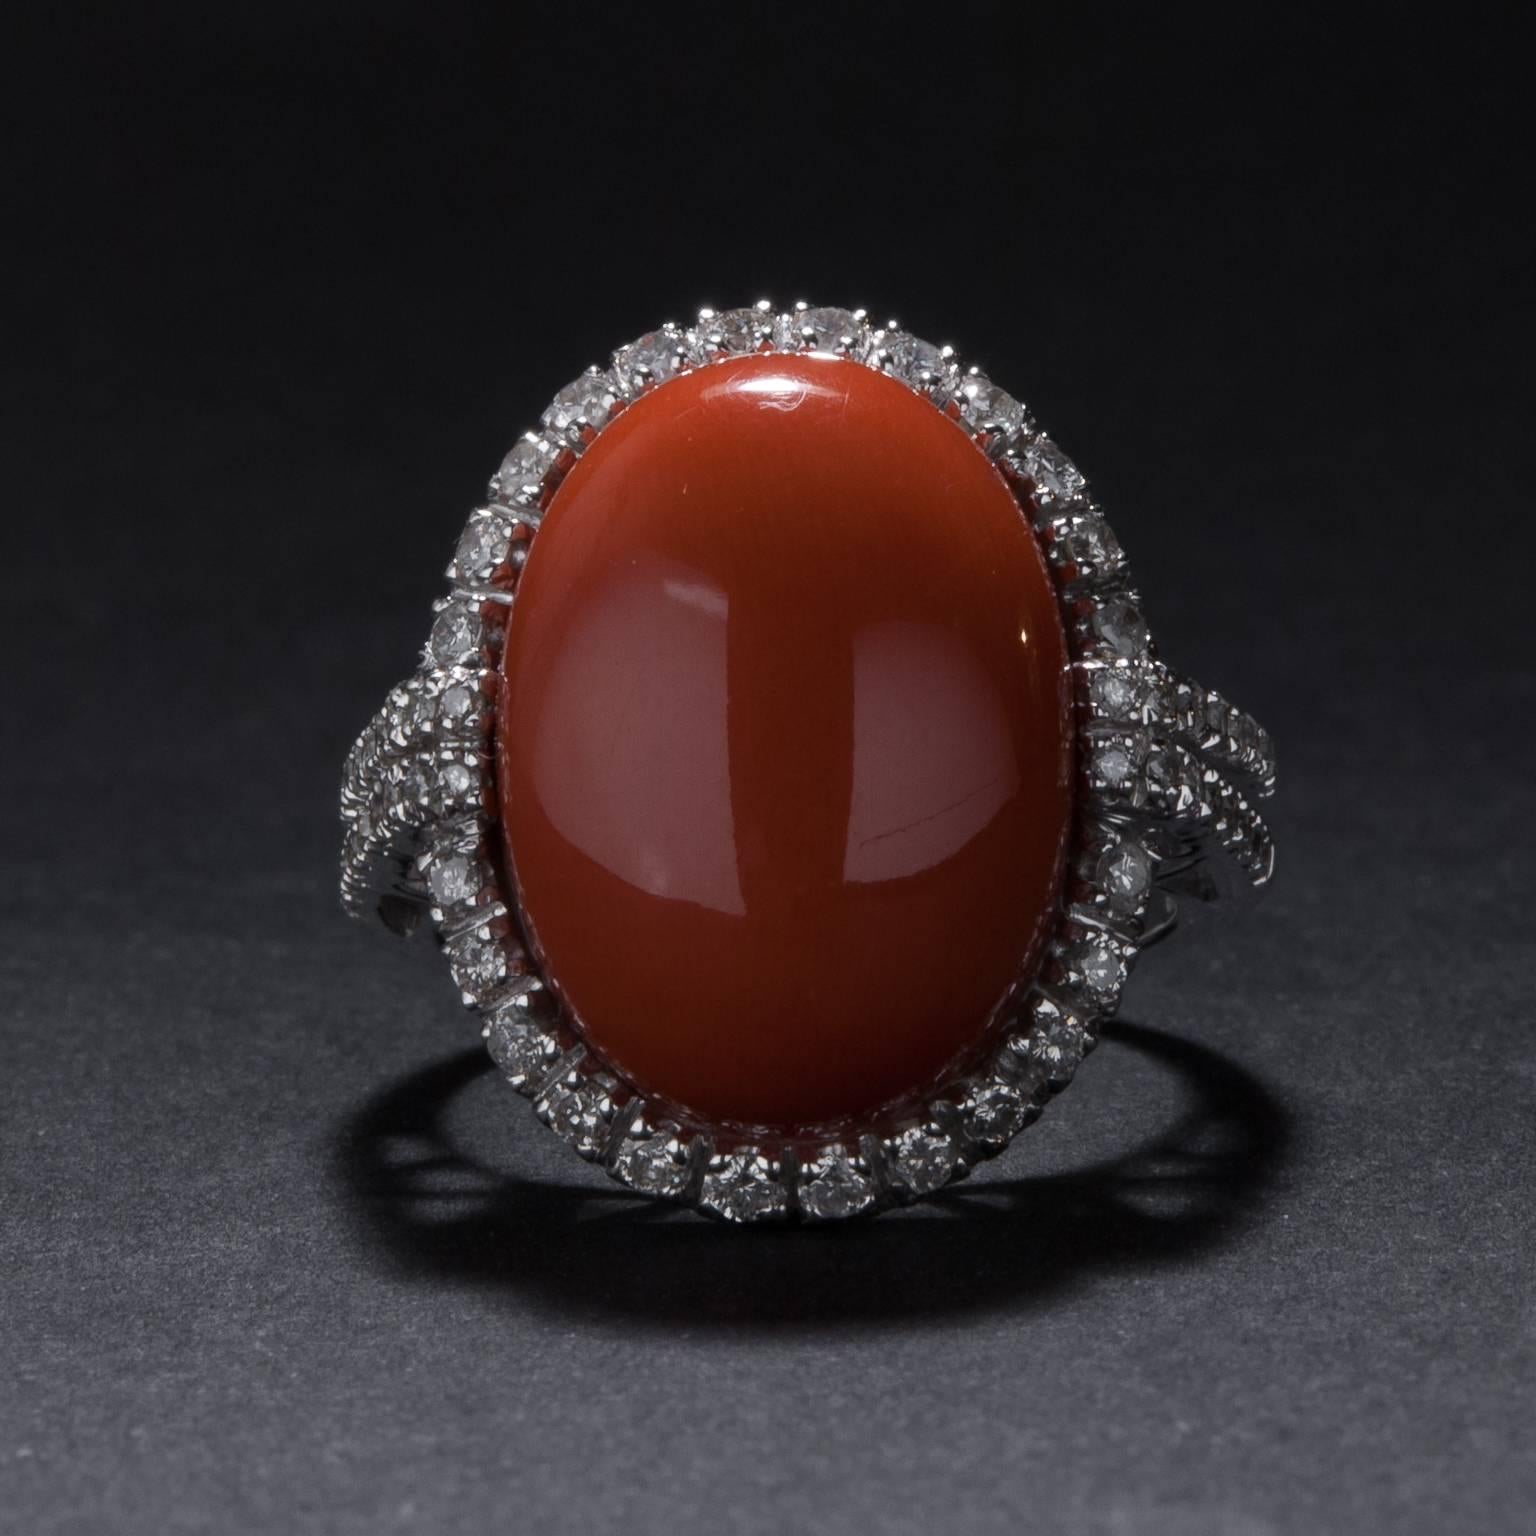 A stunning red coral ring with 52 accent diamonds weighing a total of .88 carats. The mounting is crafted in 18k white gold and it is currently size 6.75.